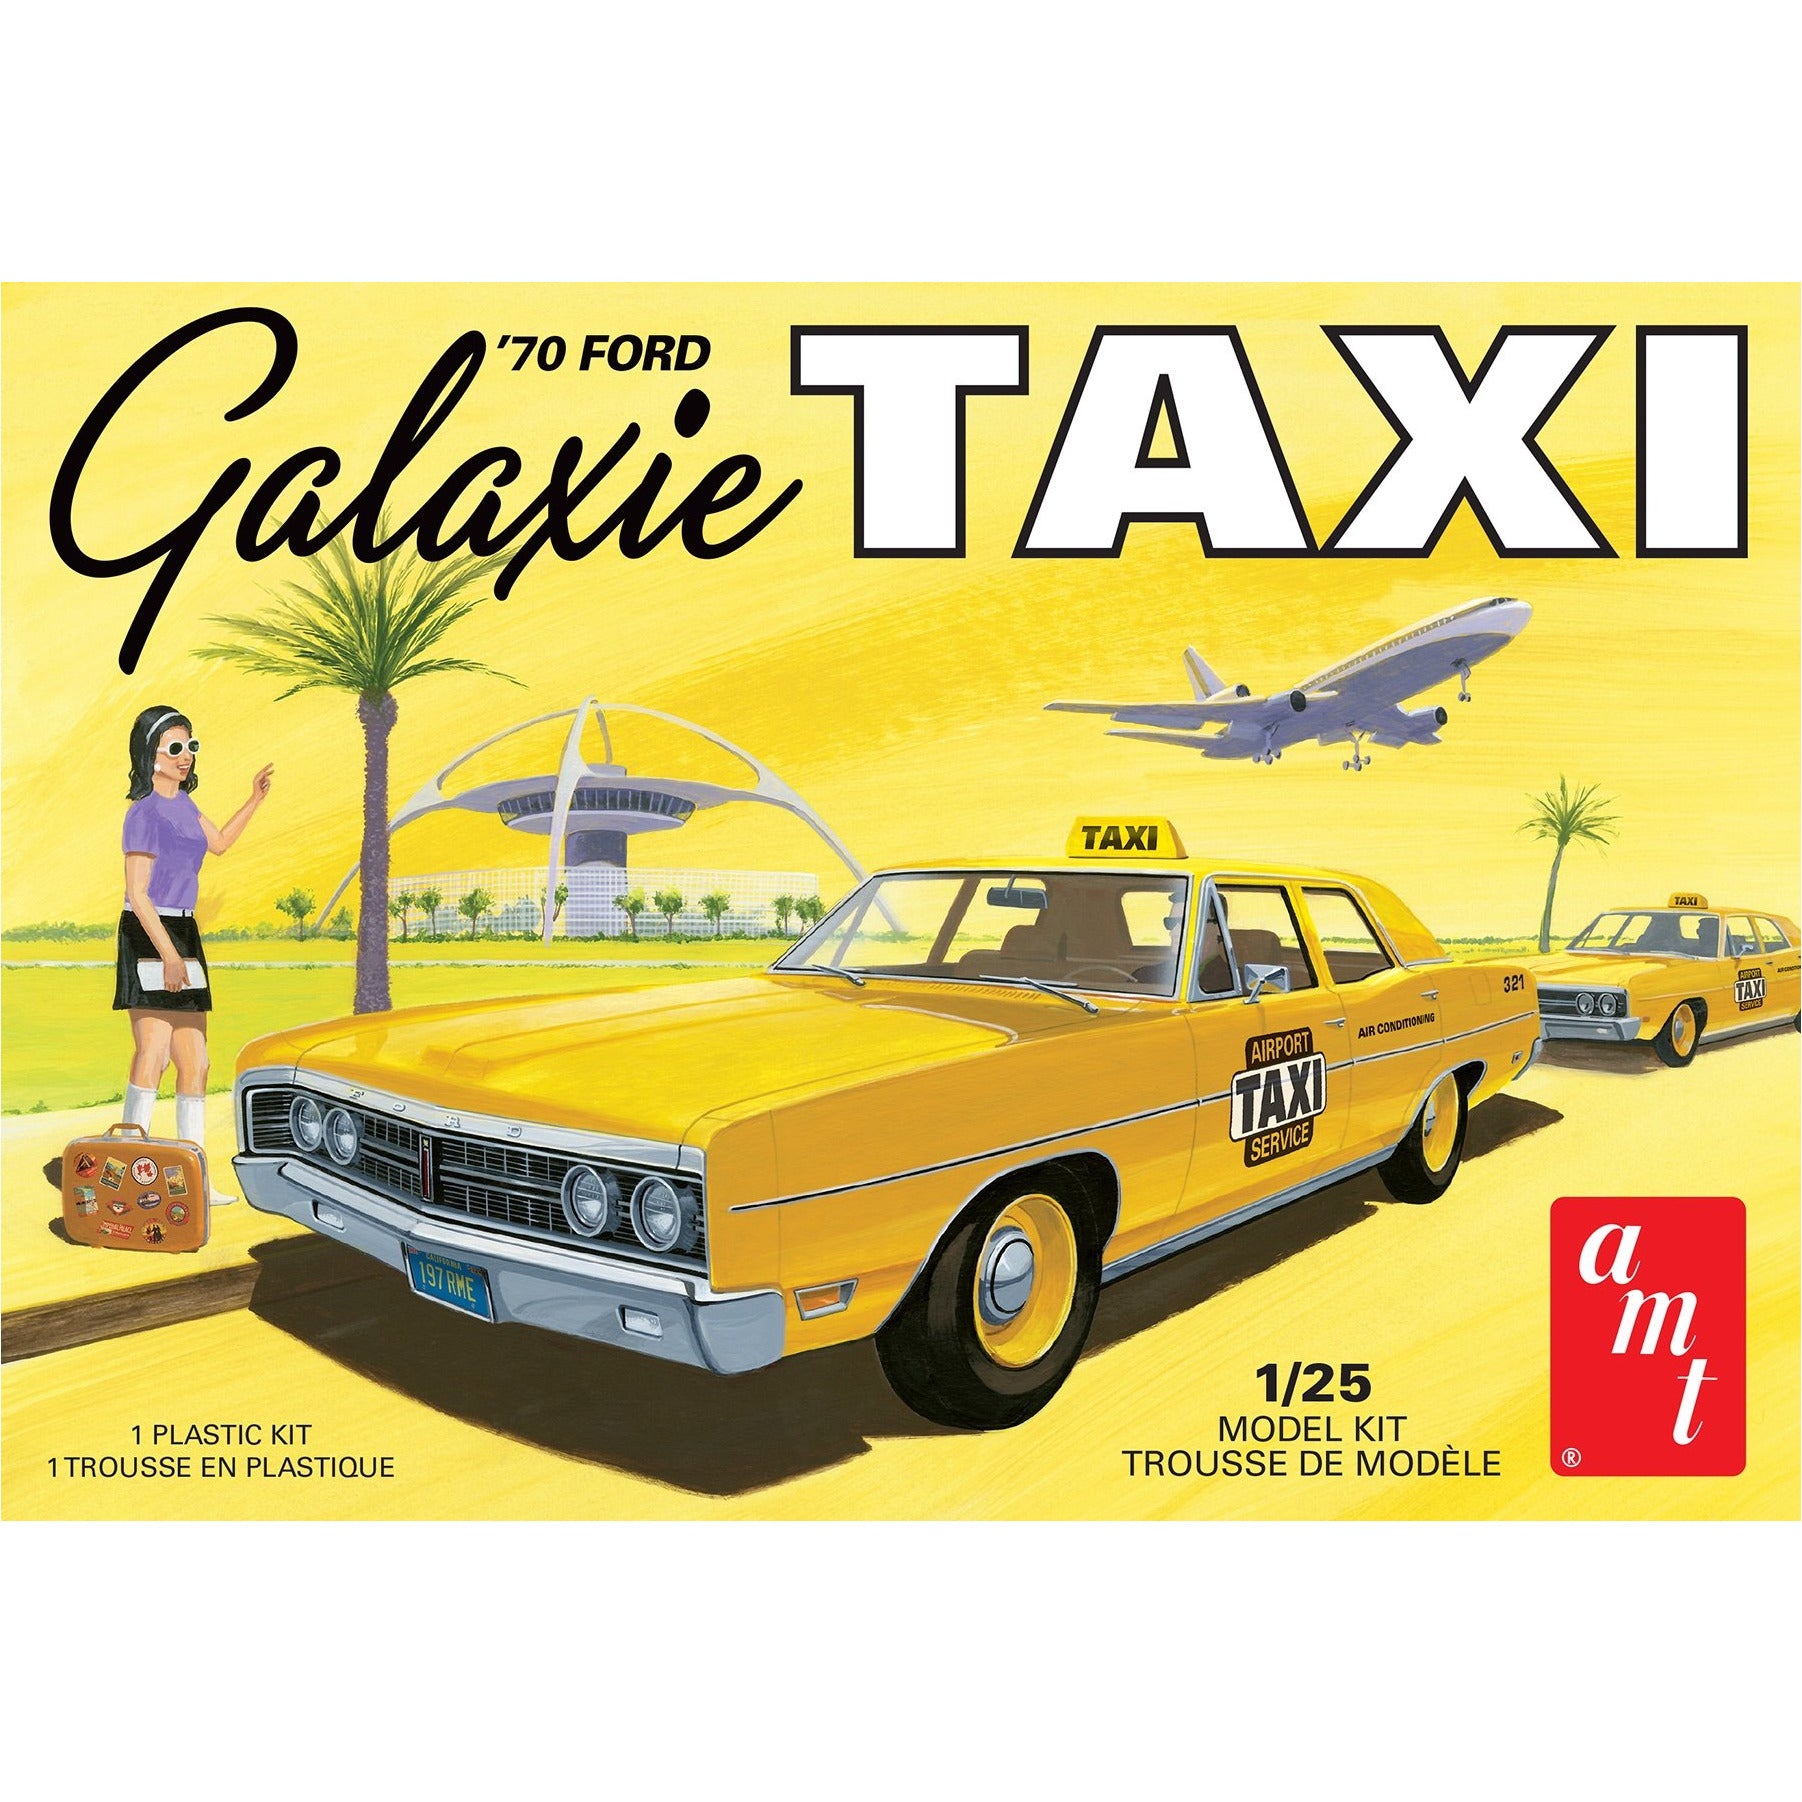 1970 Ford Galaxie Taxi 1/25 Model Car Kit #1243 by AMT